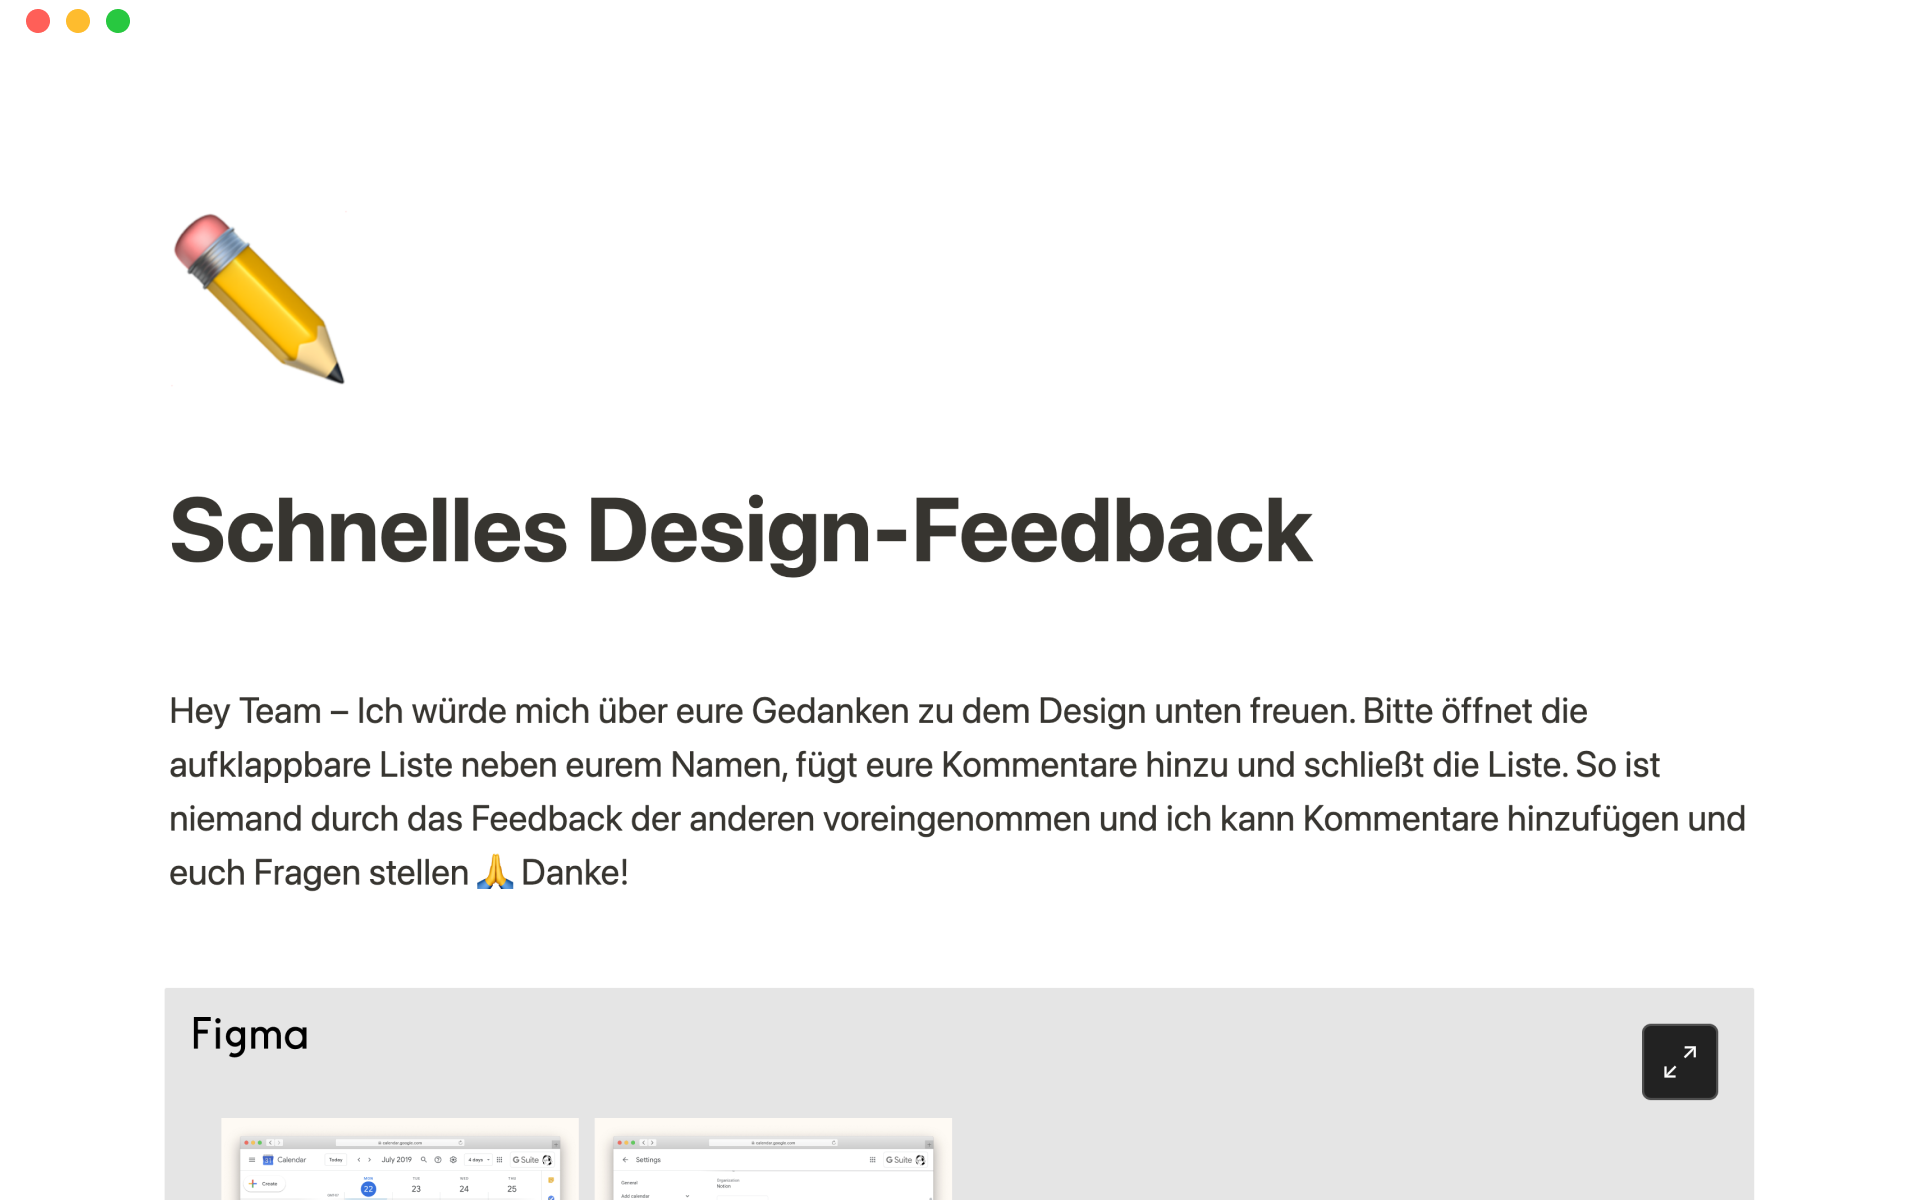 The desktop image for the Quick design feedback template